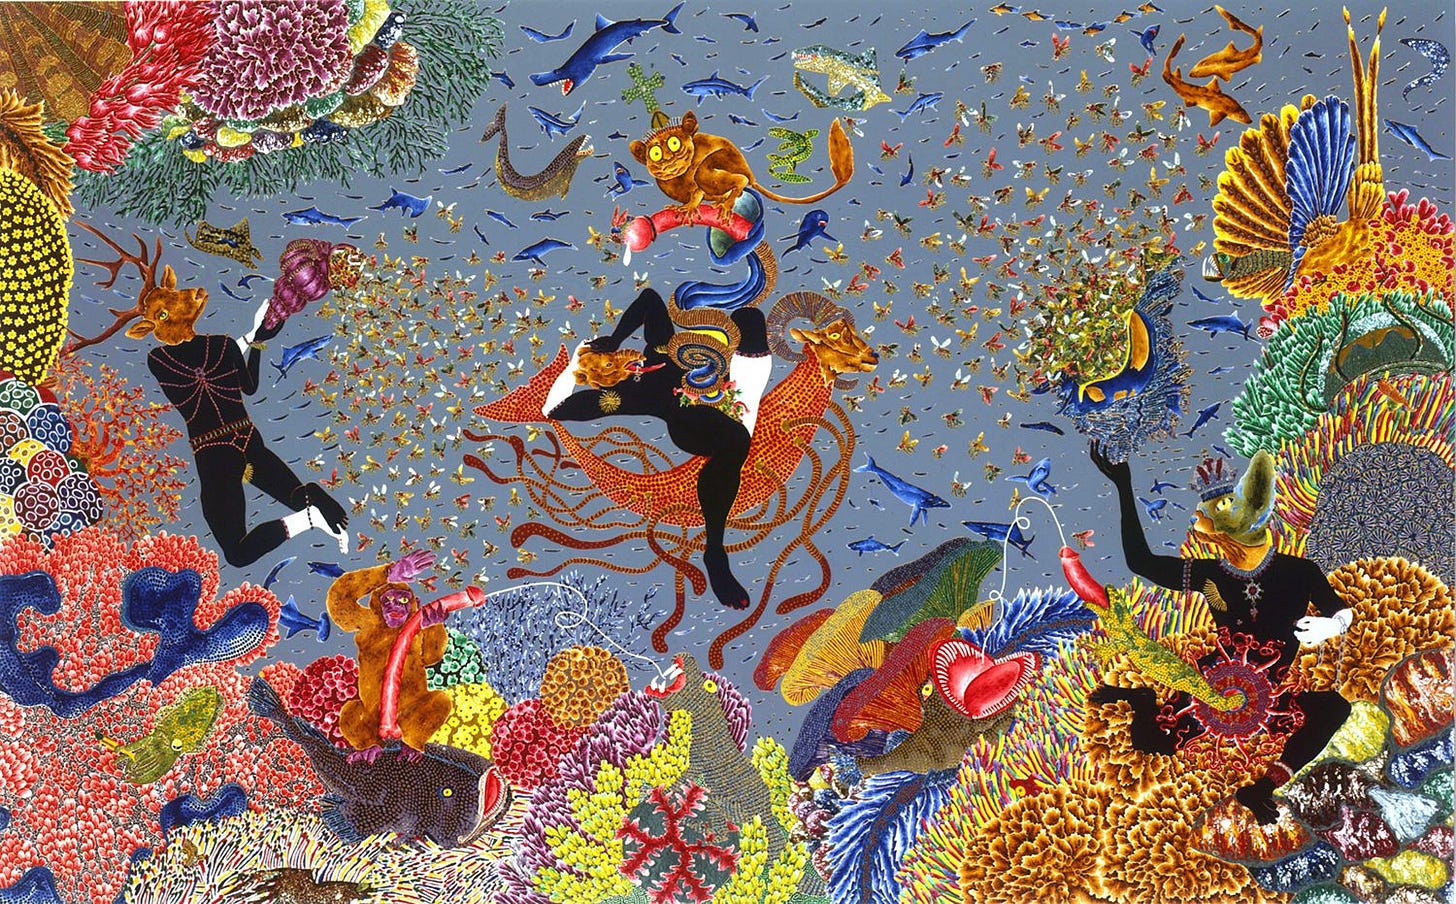 Indian Artist - Raqib Shaw is a Top selling Contemporary Artist